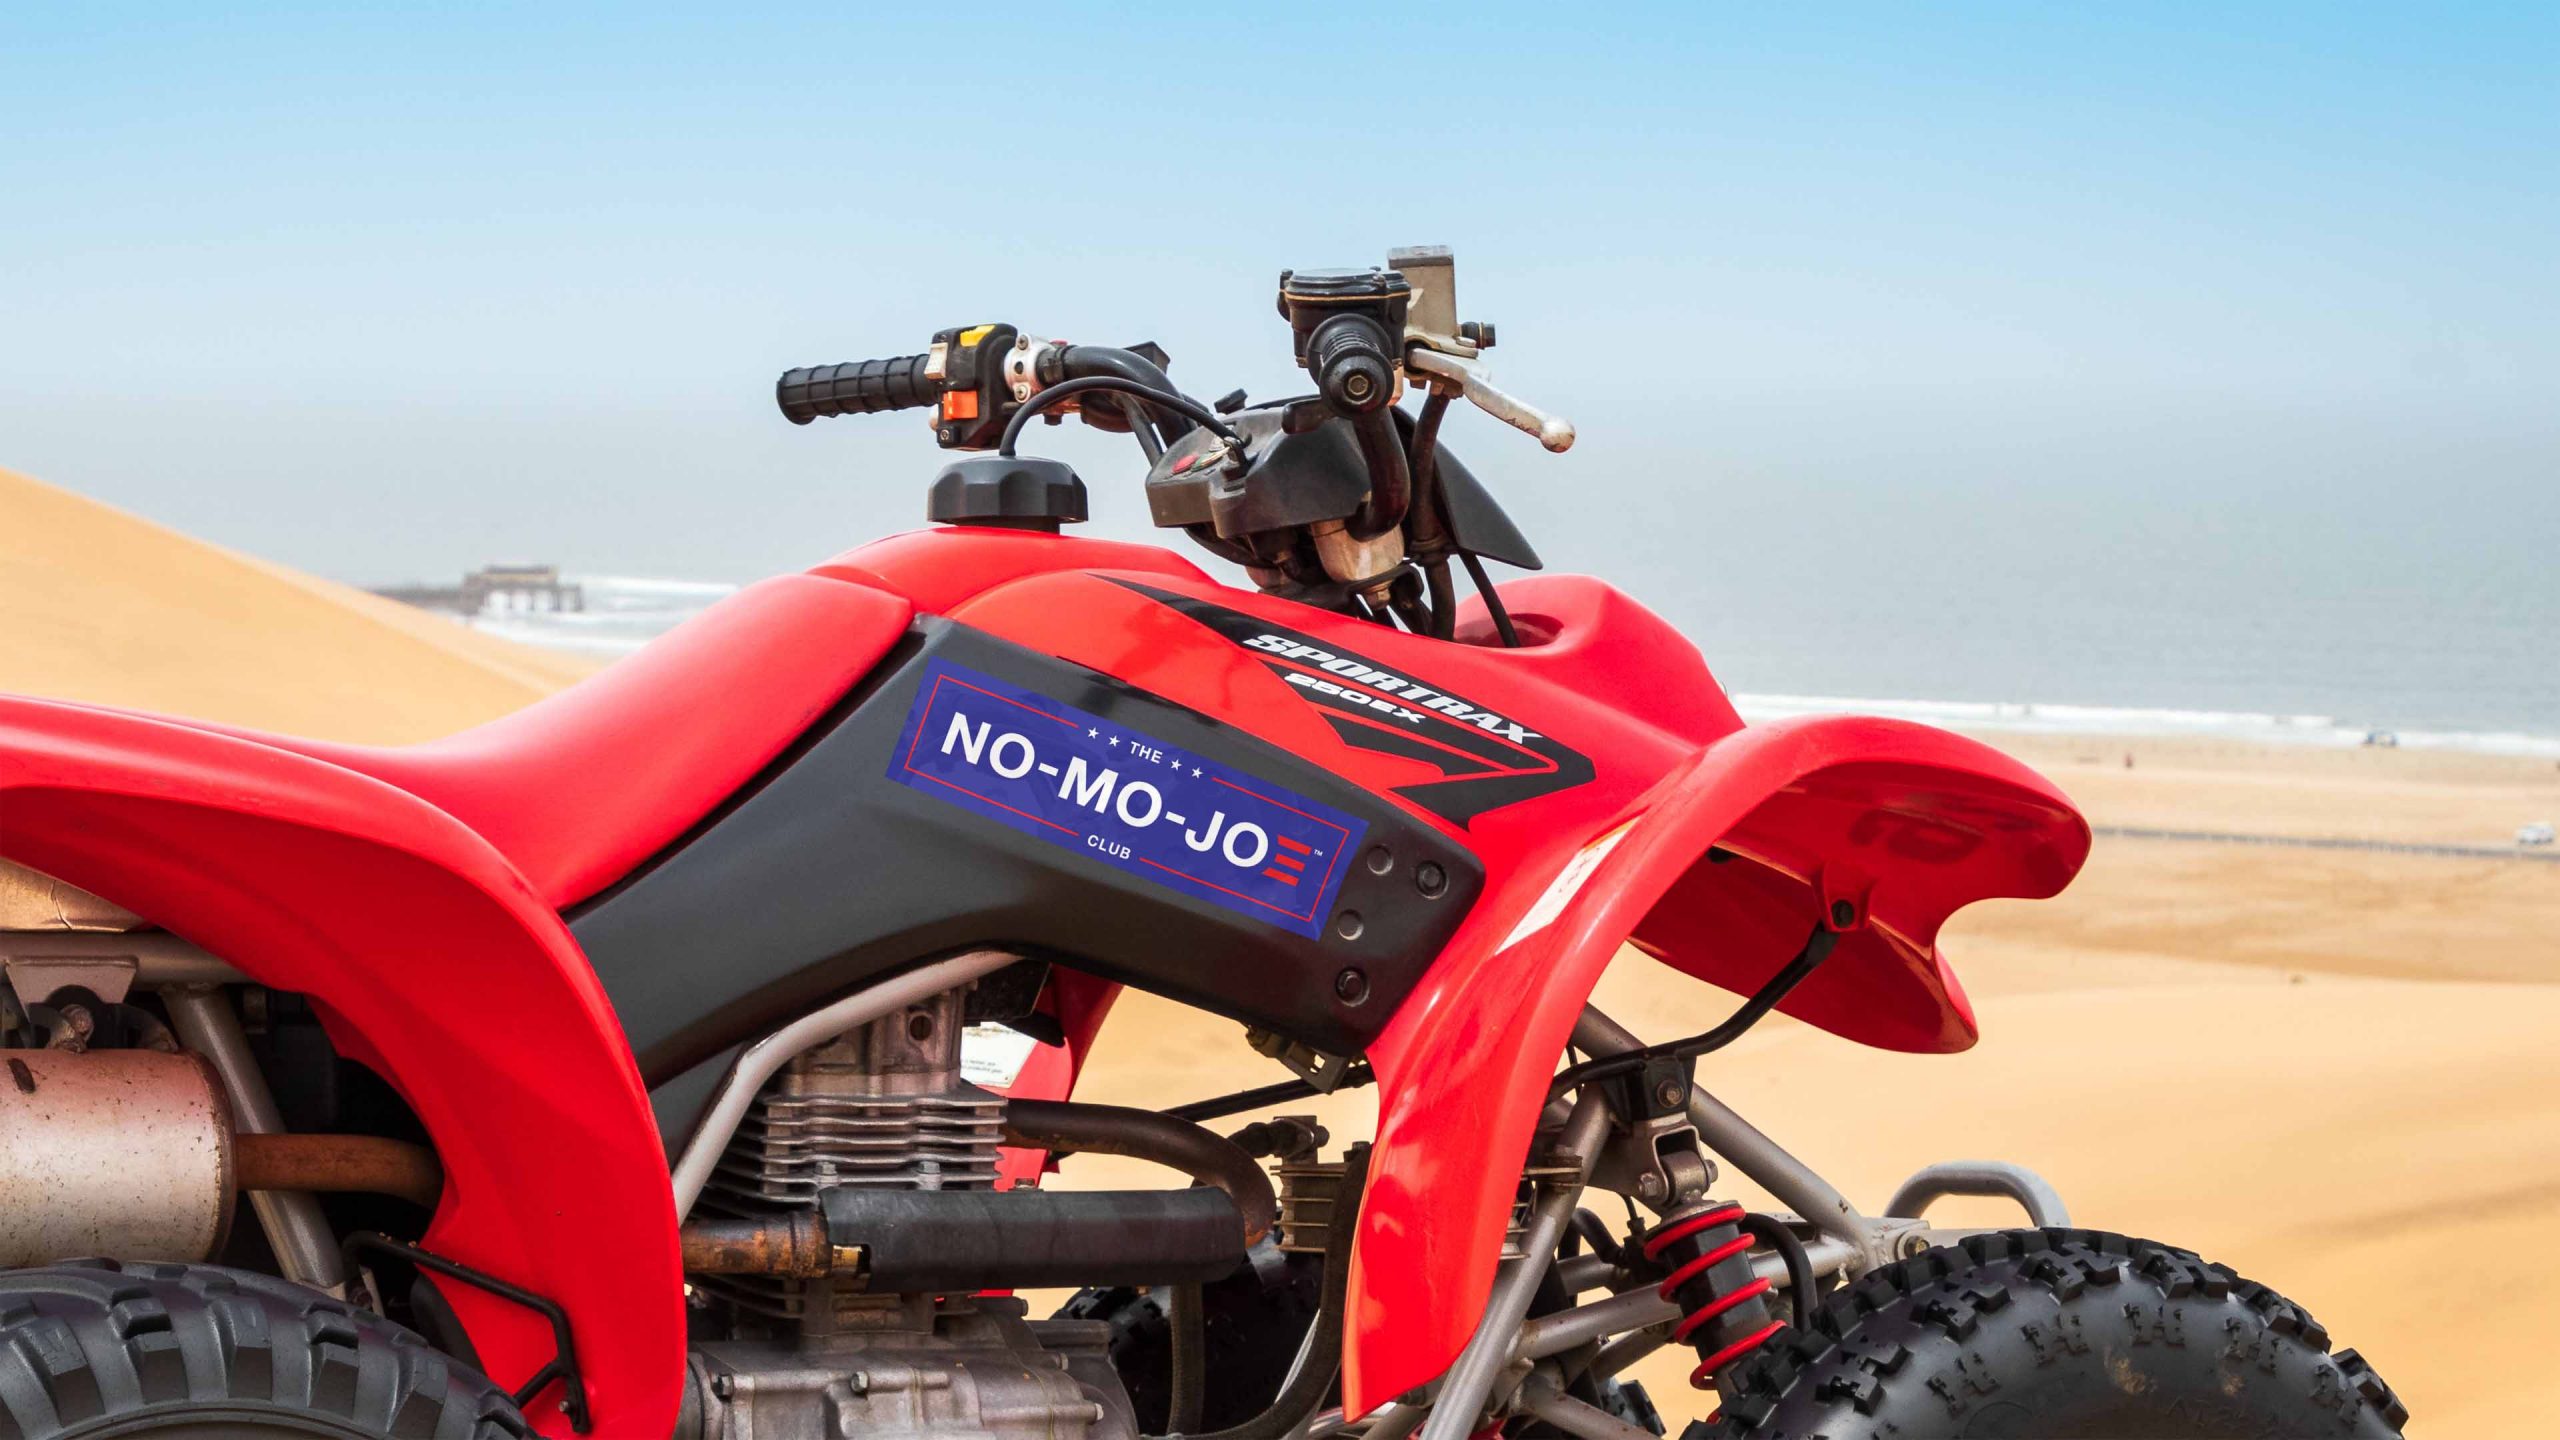 The No-Mo-Joe Club™ sticker on side panel of red four wheeler in dunes near the beach.